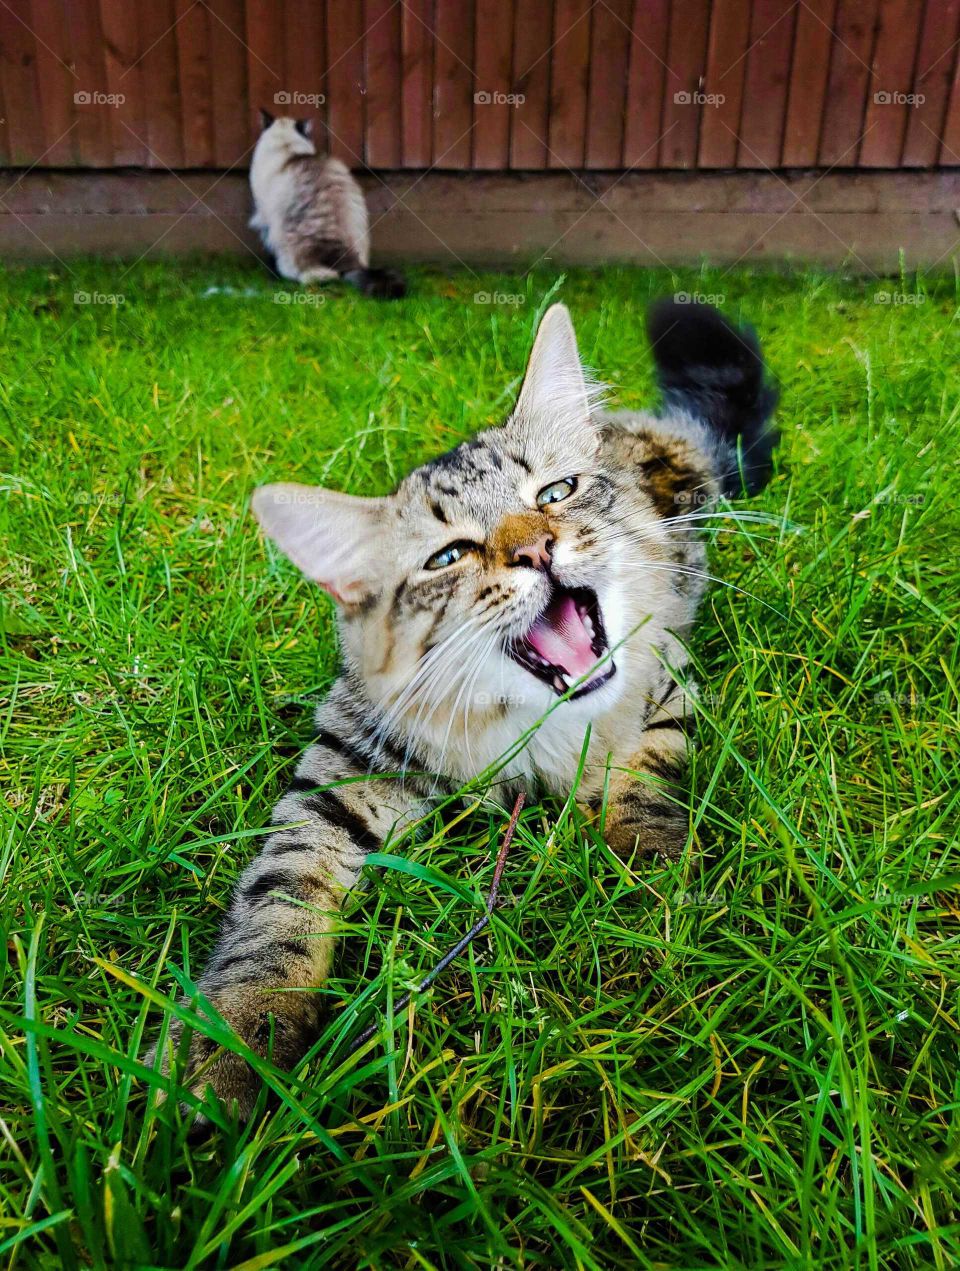 Fluffy Maine coon tabby lynx kitten playing with grass in the garden.